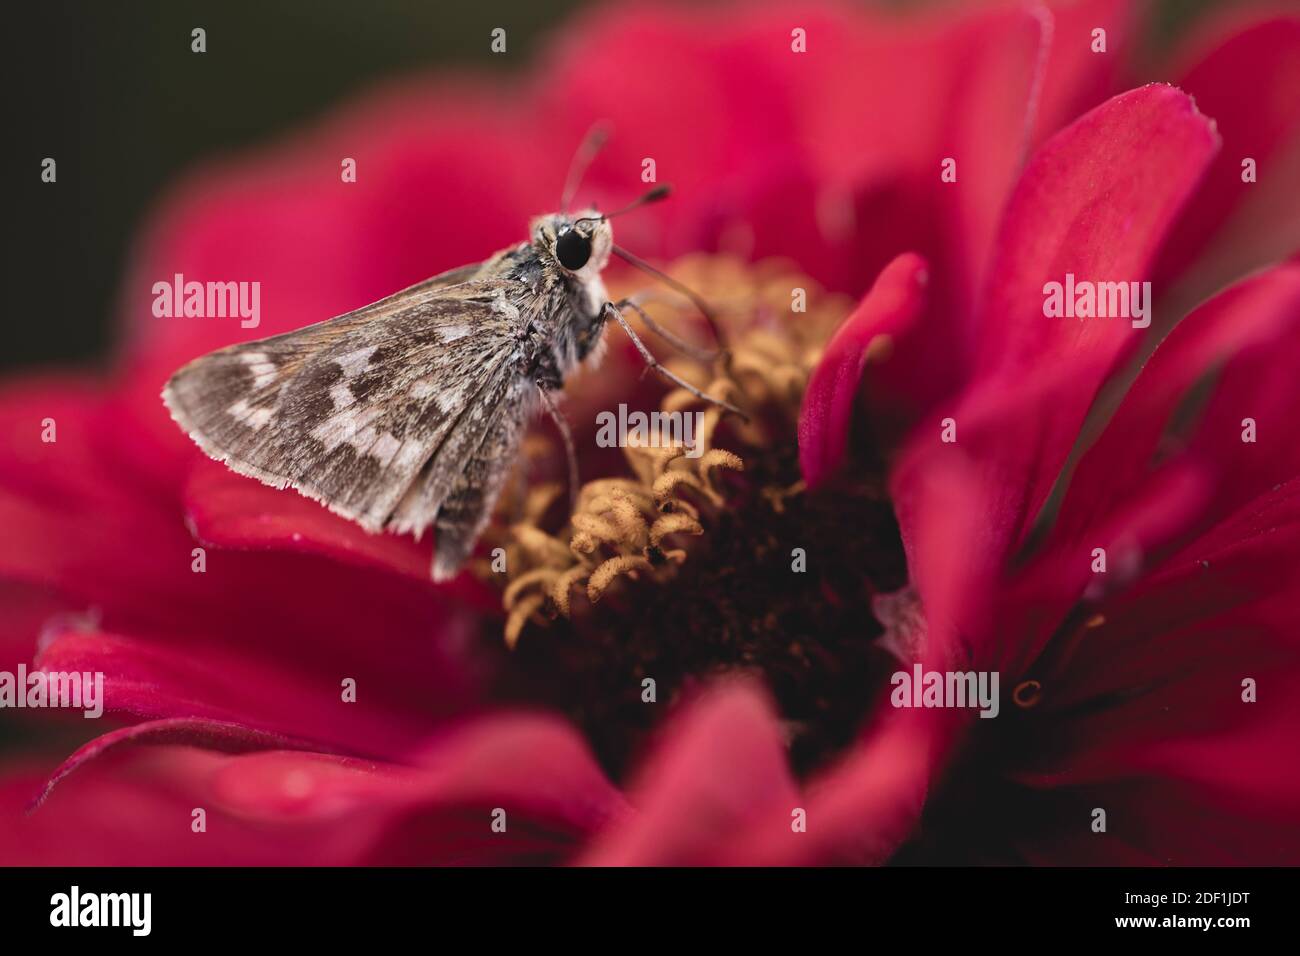 garden visitor to red zinnia blossom Stock Photo